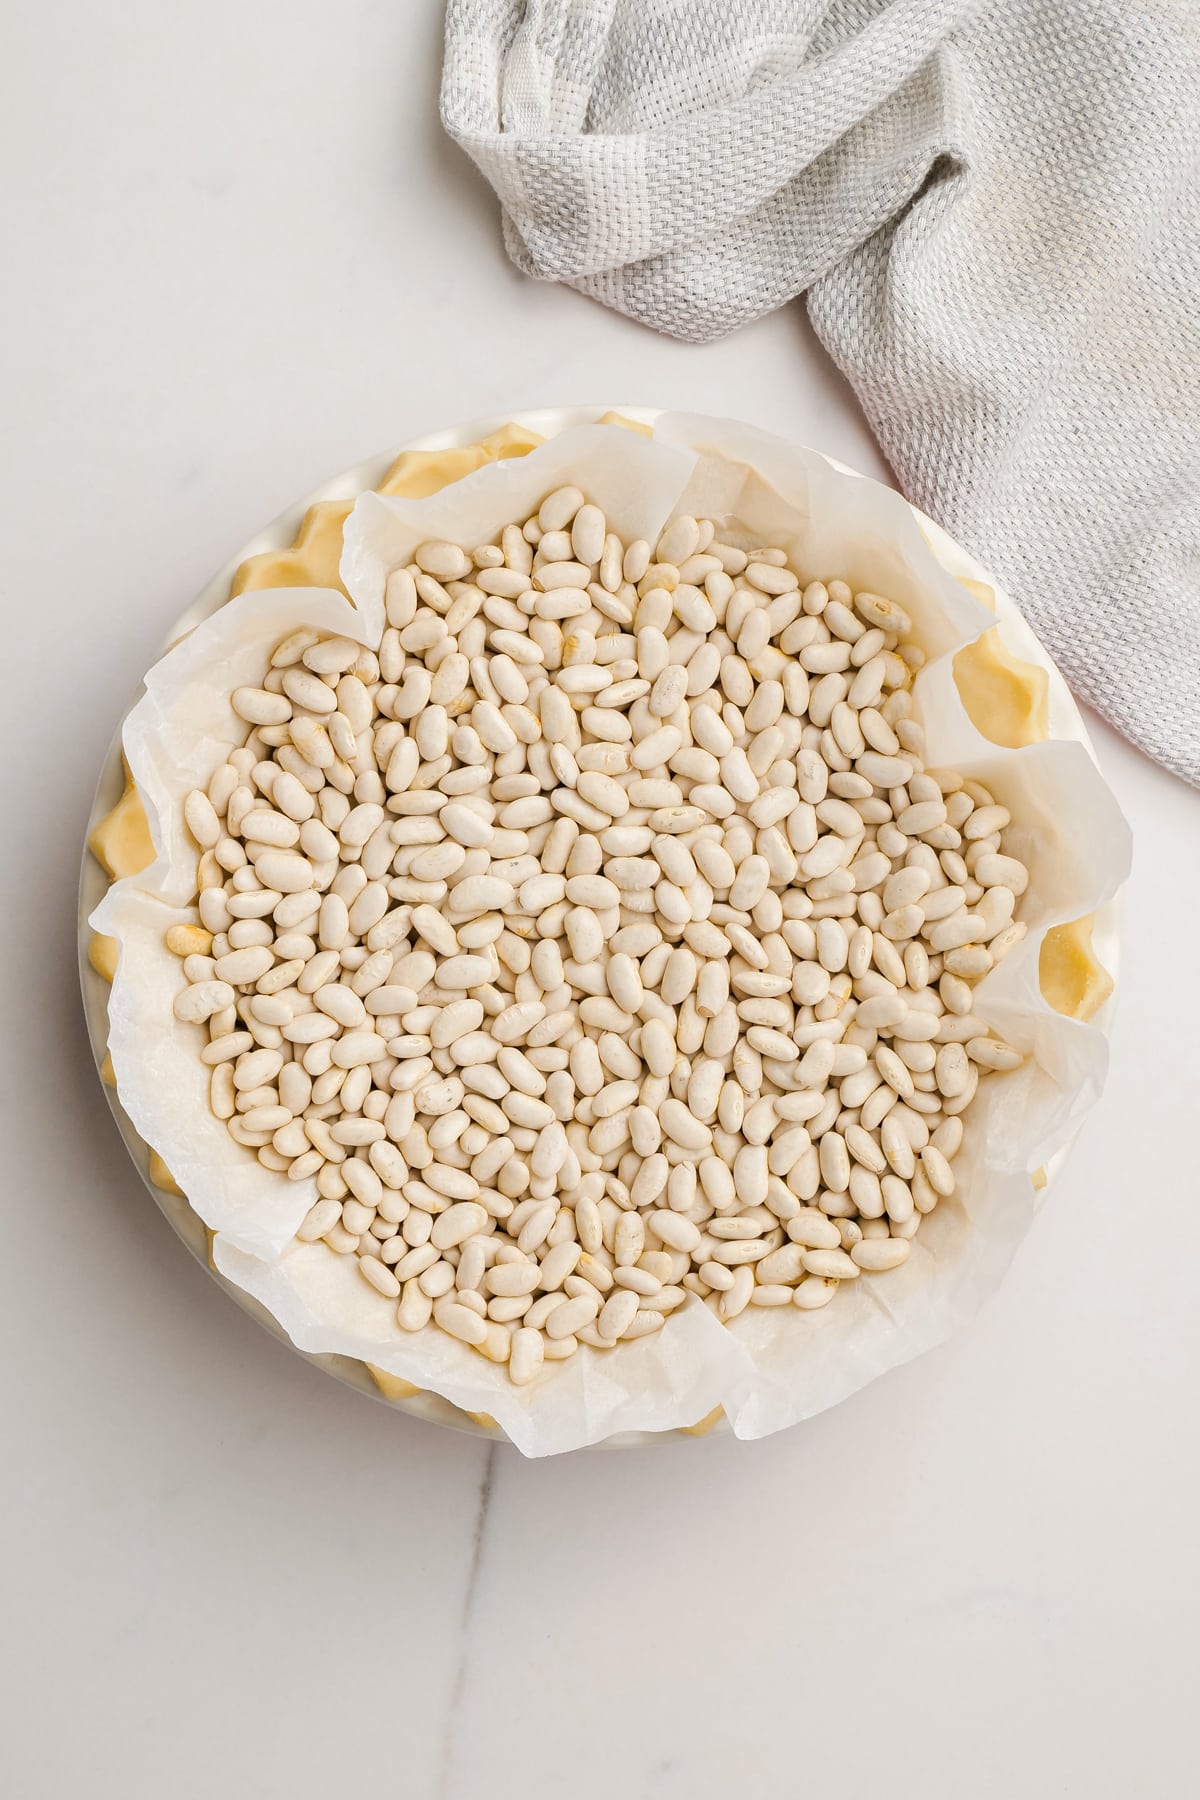 pie crust with beans to blind bake